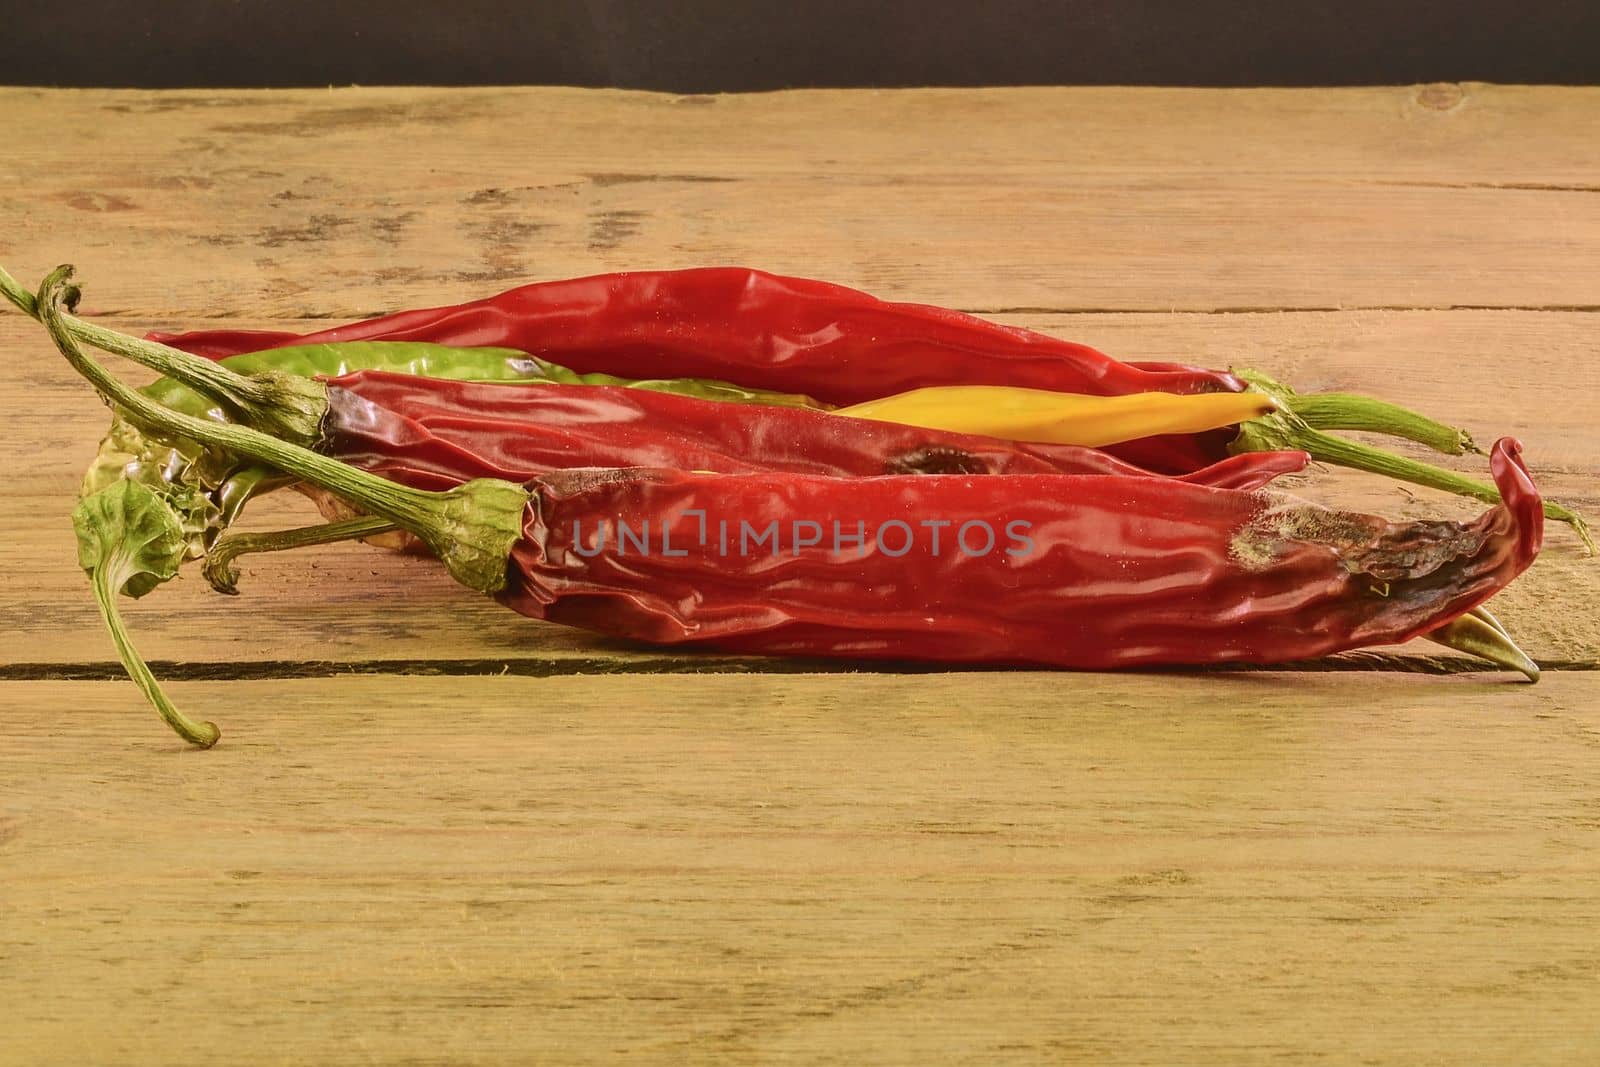 Shrinking and mould chili peppers on white wooden background. Rotten chili peppers by roman_nerud